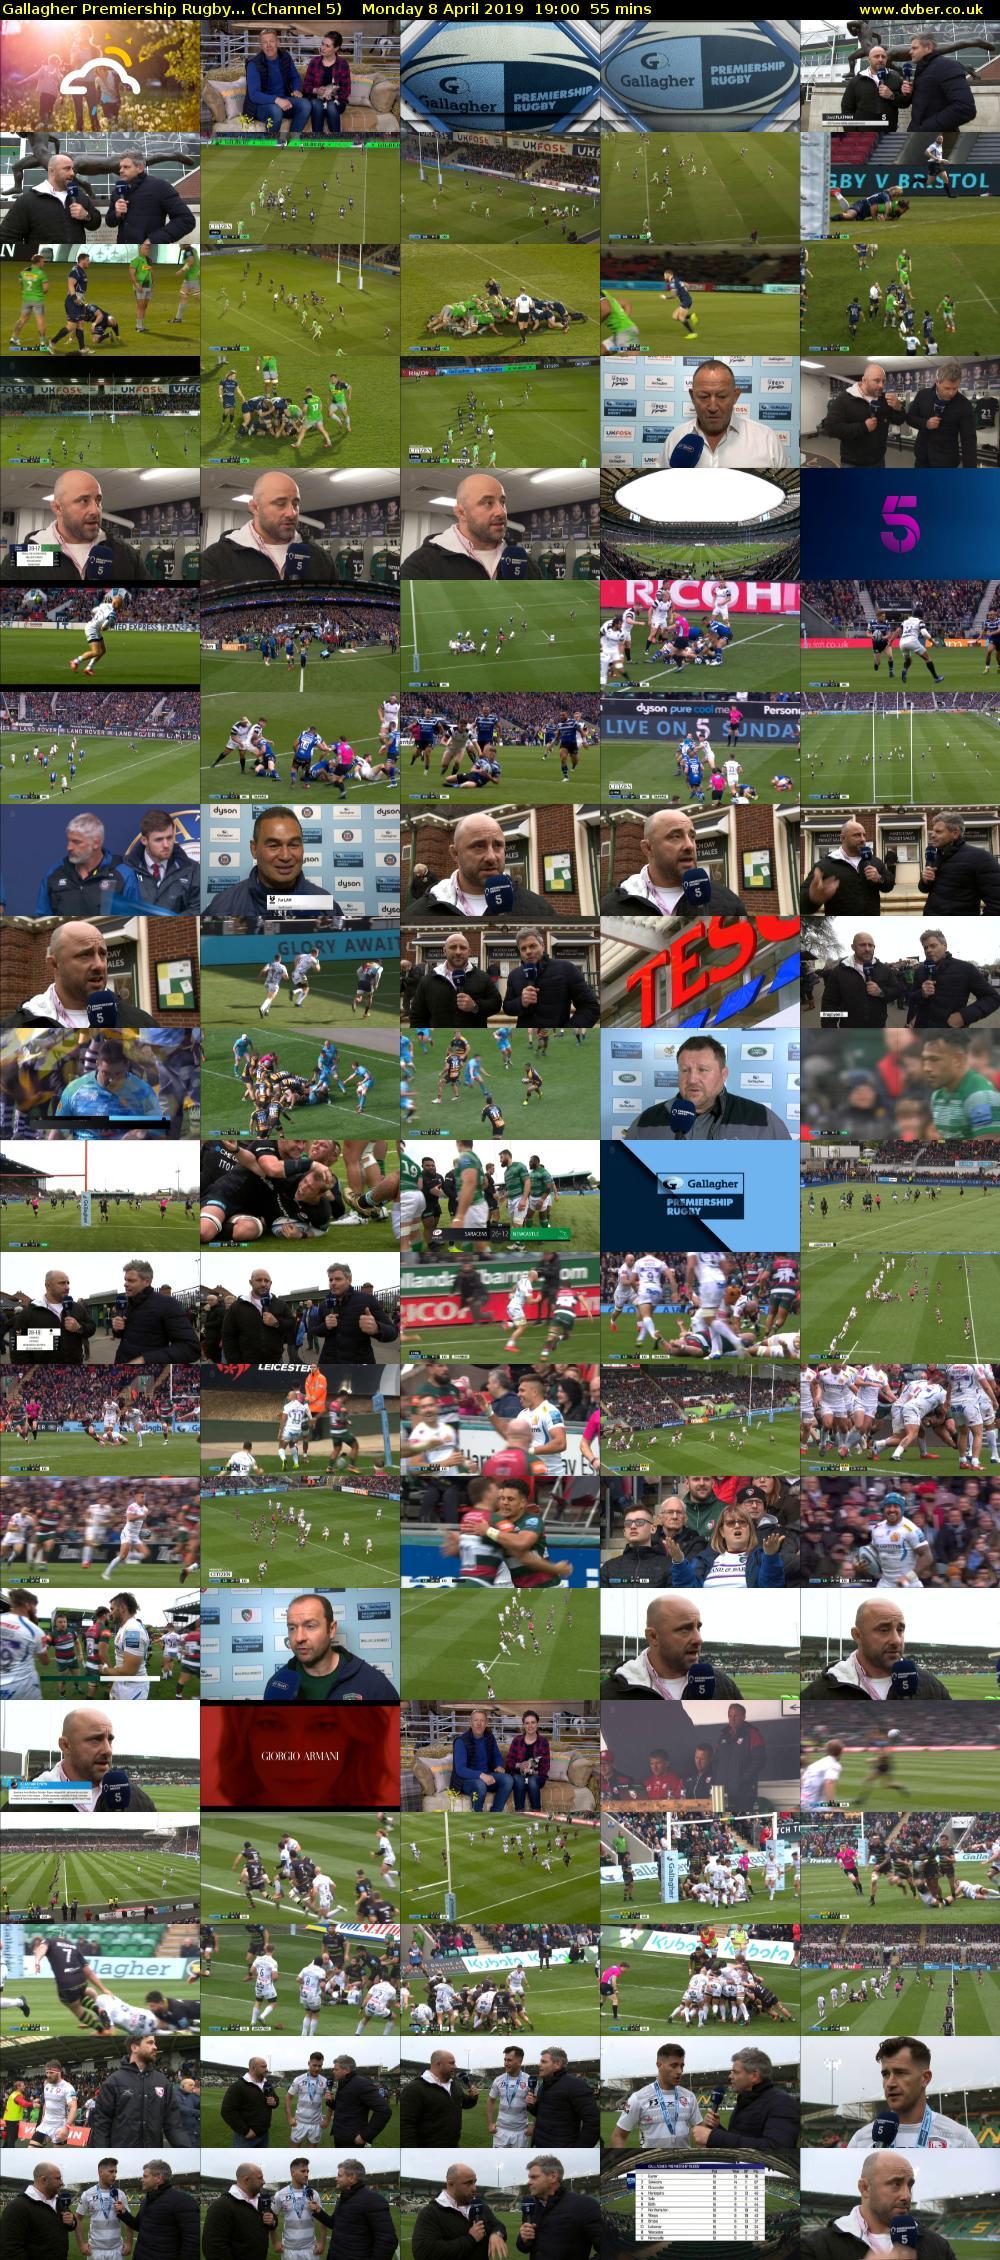 Gallagher Premiership Rugby... (Channel 5) Monday 8 April 2019 19:00 - 19:55